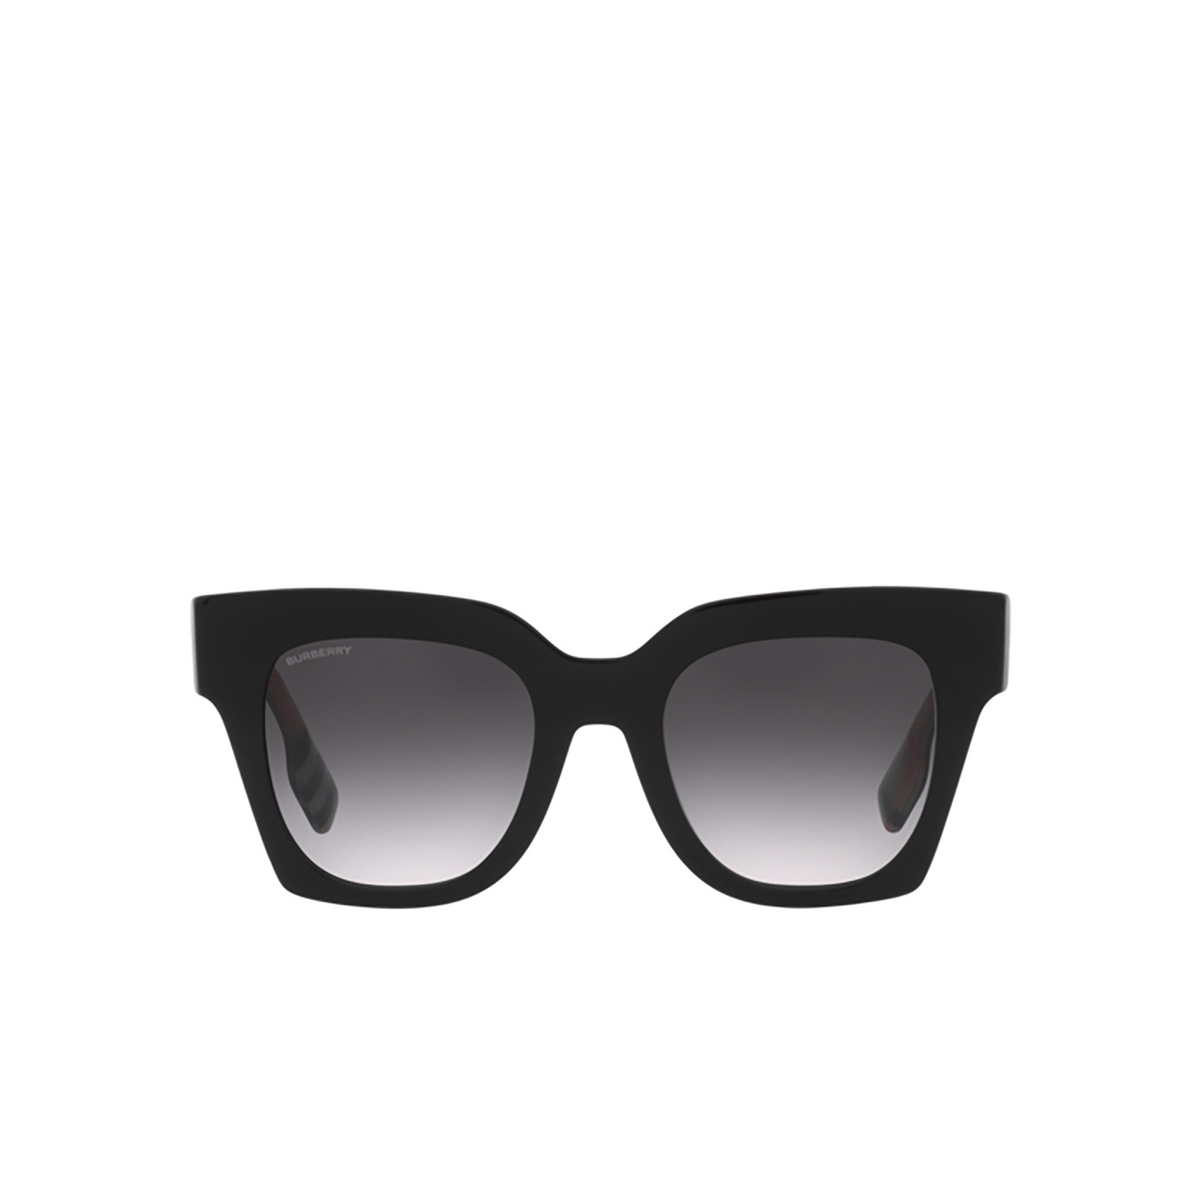 Burberry KITTY Sunglasses 39428G Black - front view